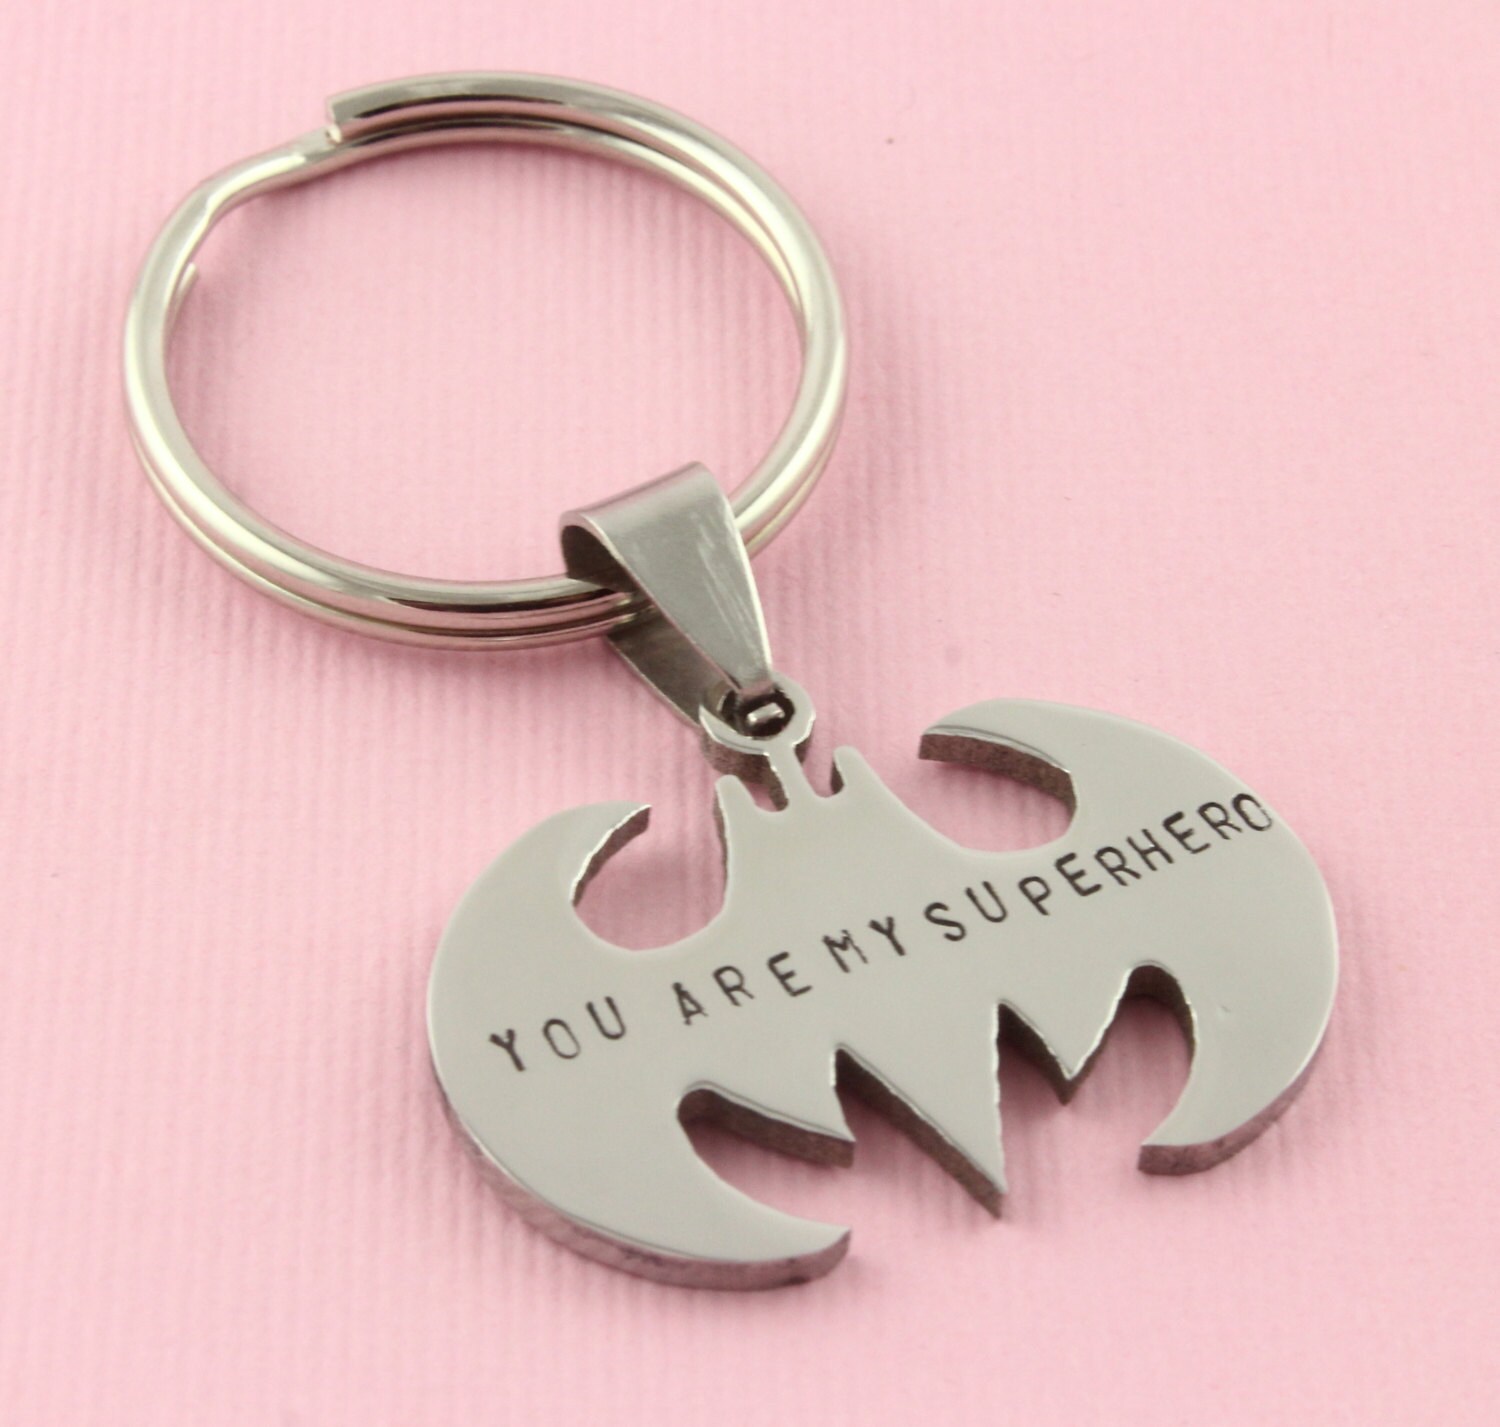 You Are My Superhero Bat Key Chain Hand Stamped Personalized